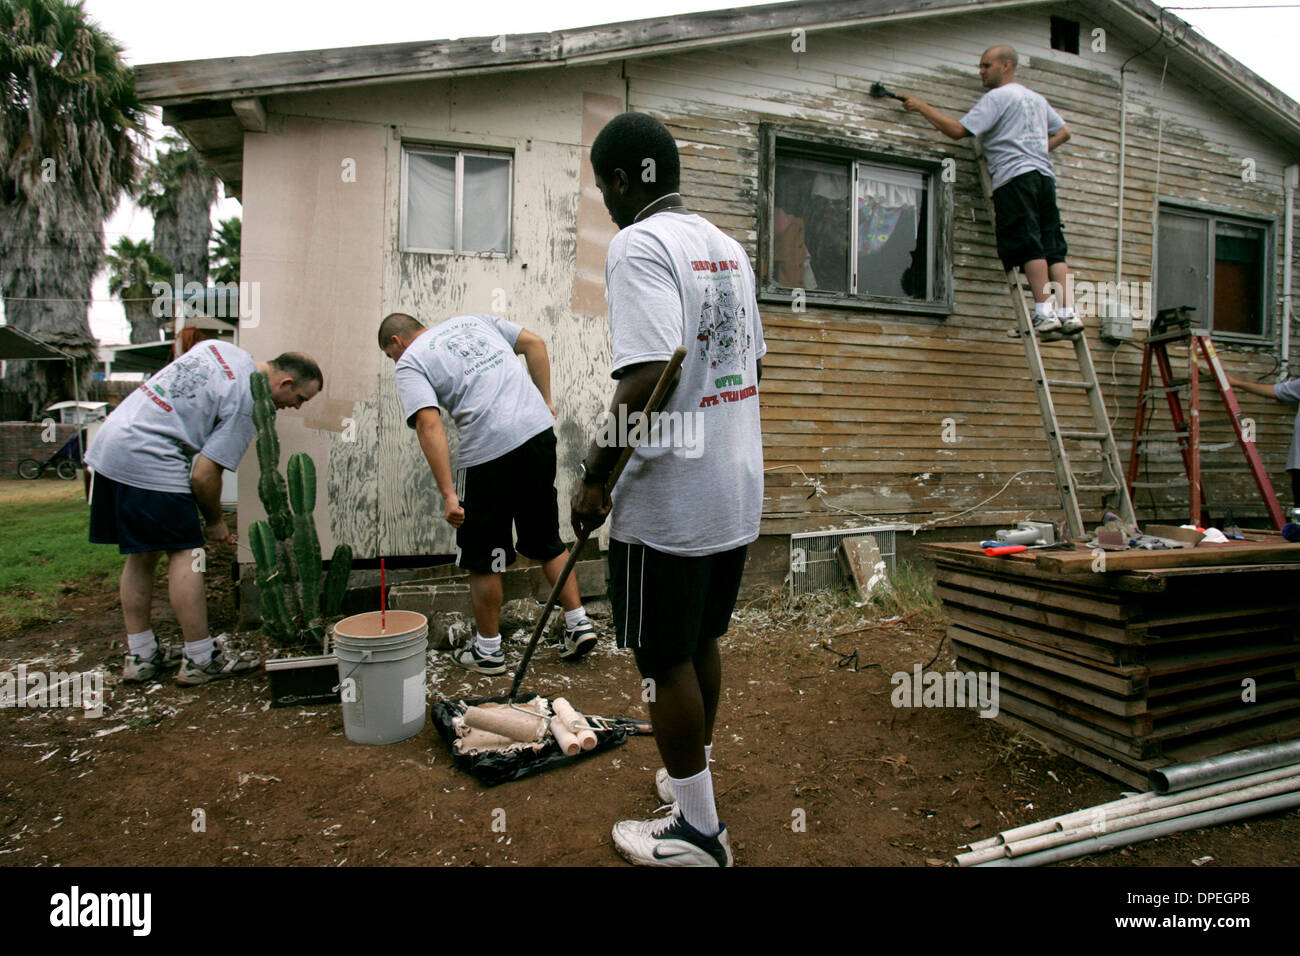 (Published 7/30/2006, B-7:R)  July 29, 2006 National City, CA  Navy Fleet Anti-Submarine Warfare volunteers GREG BINGMAN, left, and DAVE CURRIER, check for spiders as SHAWN KING, center, and JAY AU, right, prepare a National City home for painting as part of Christmas in July. The organization is a non-profit that repairs and rehabilitates old homes.  Mandatory Credit photo by Laur Stock Photo